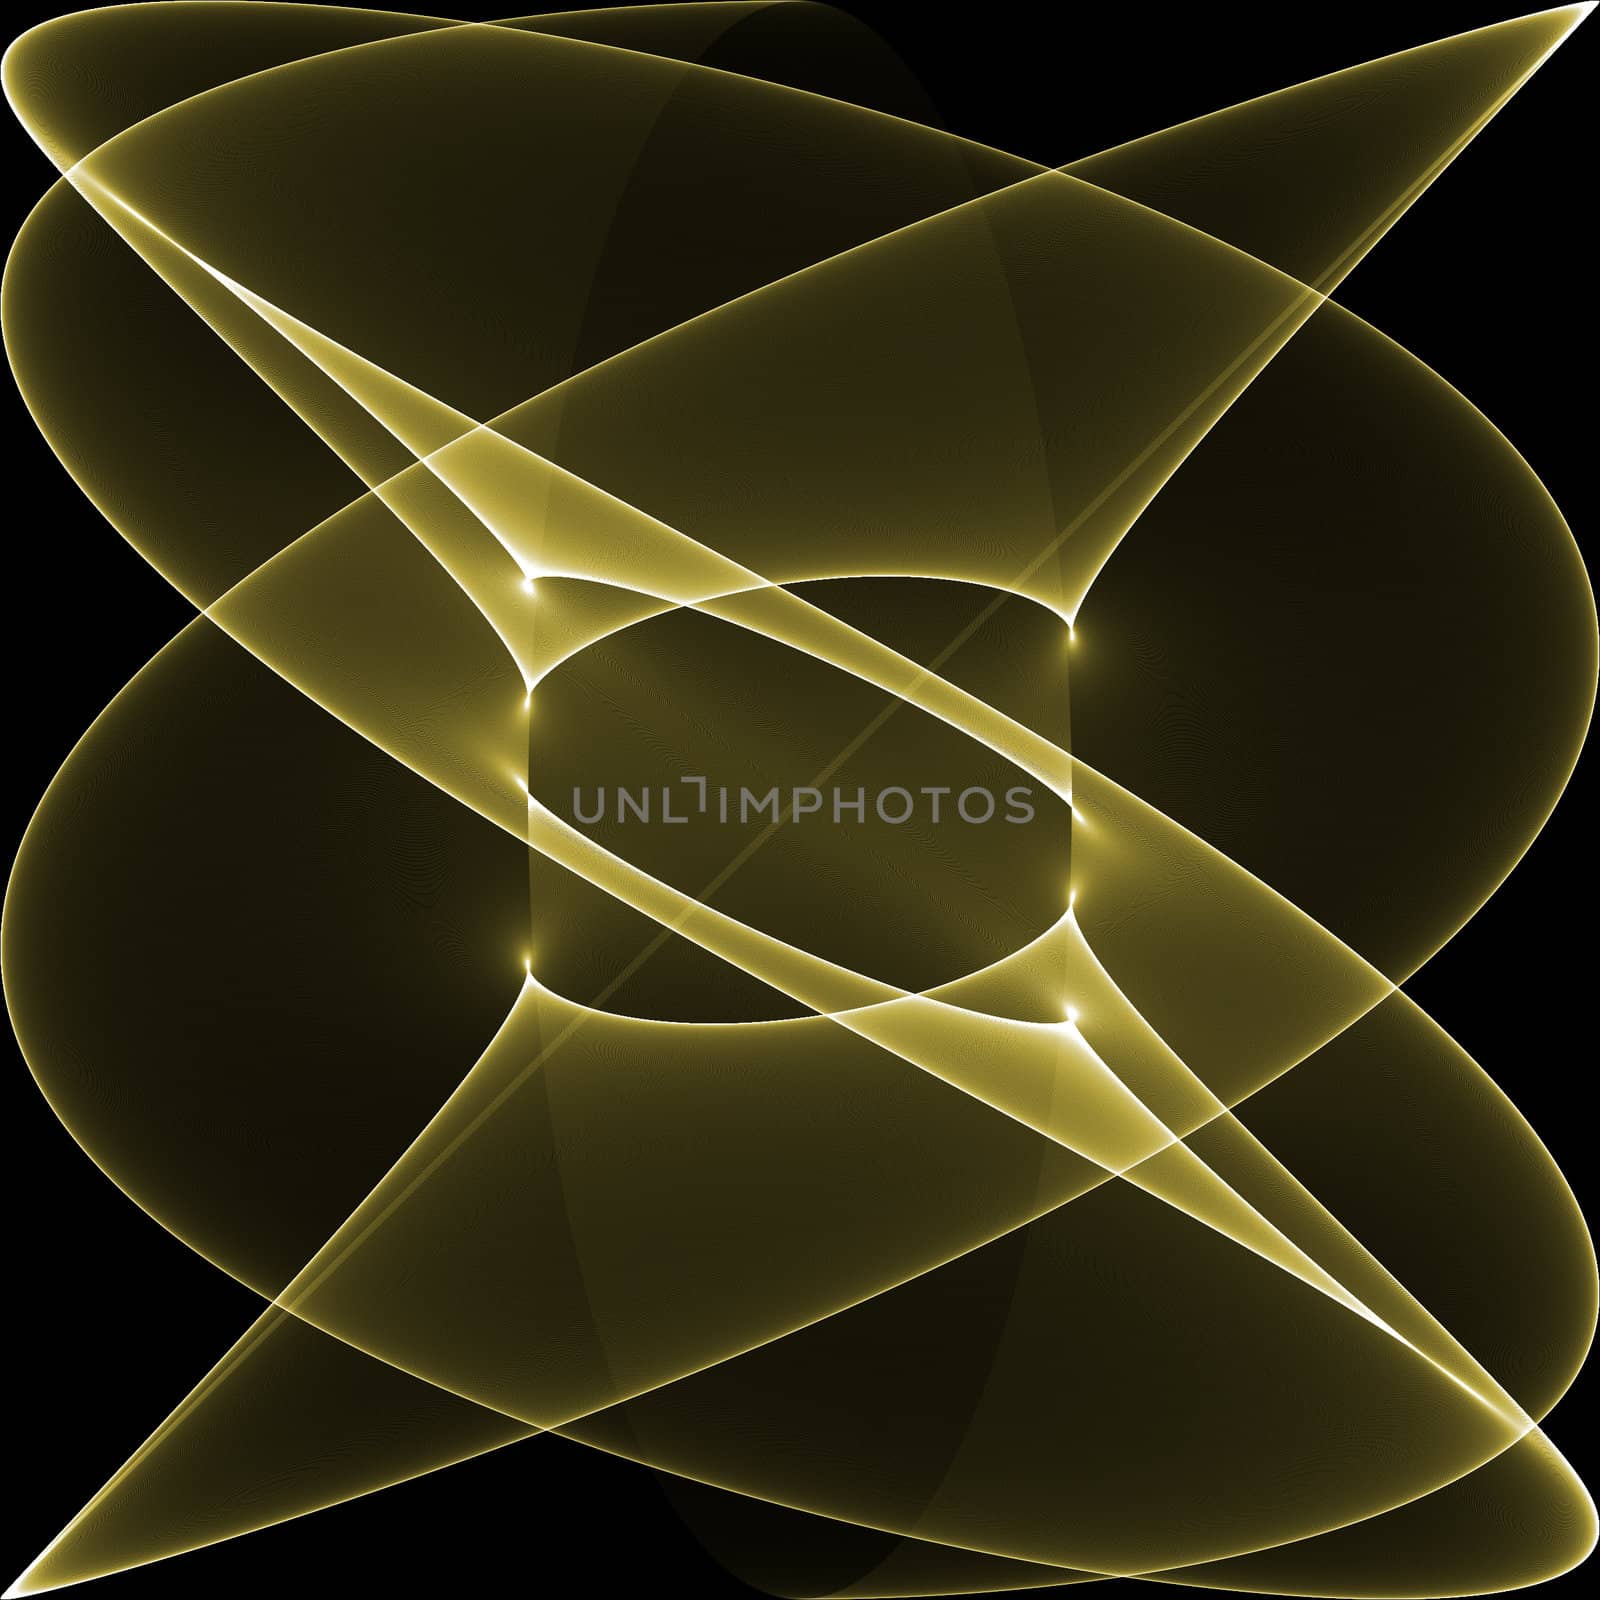 Abstract fractal design isolated in black